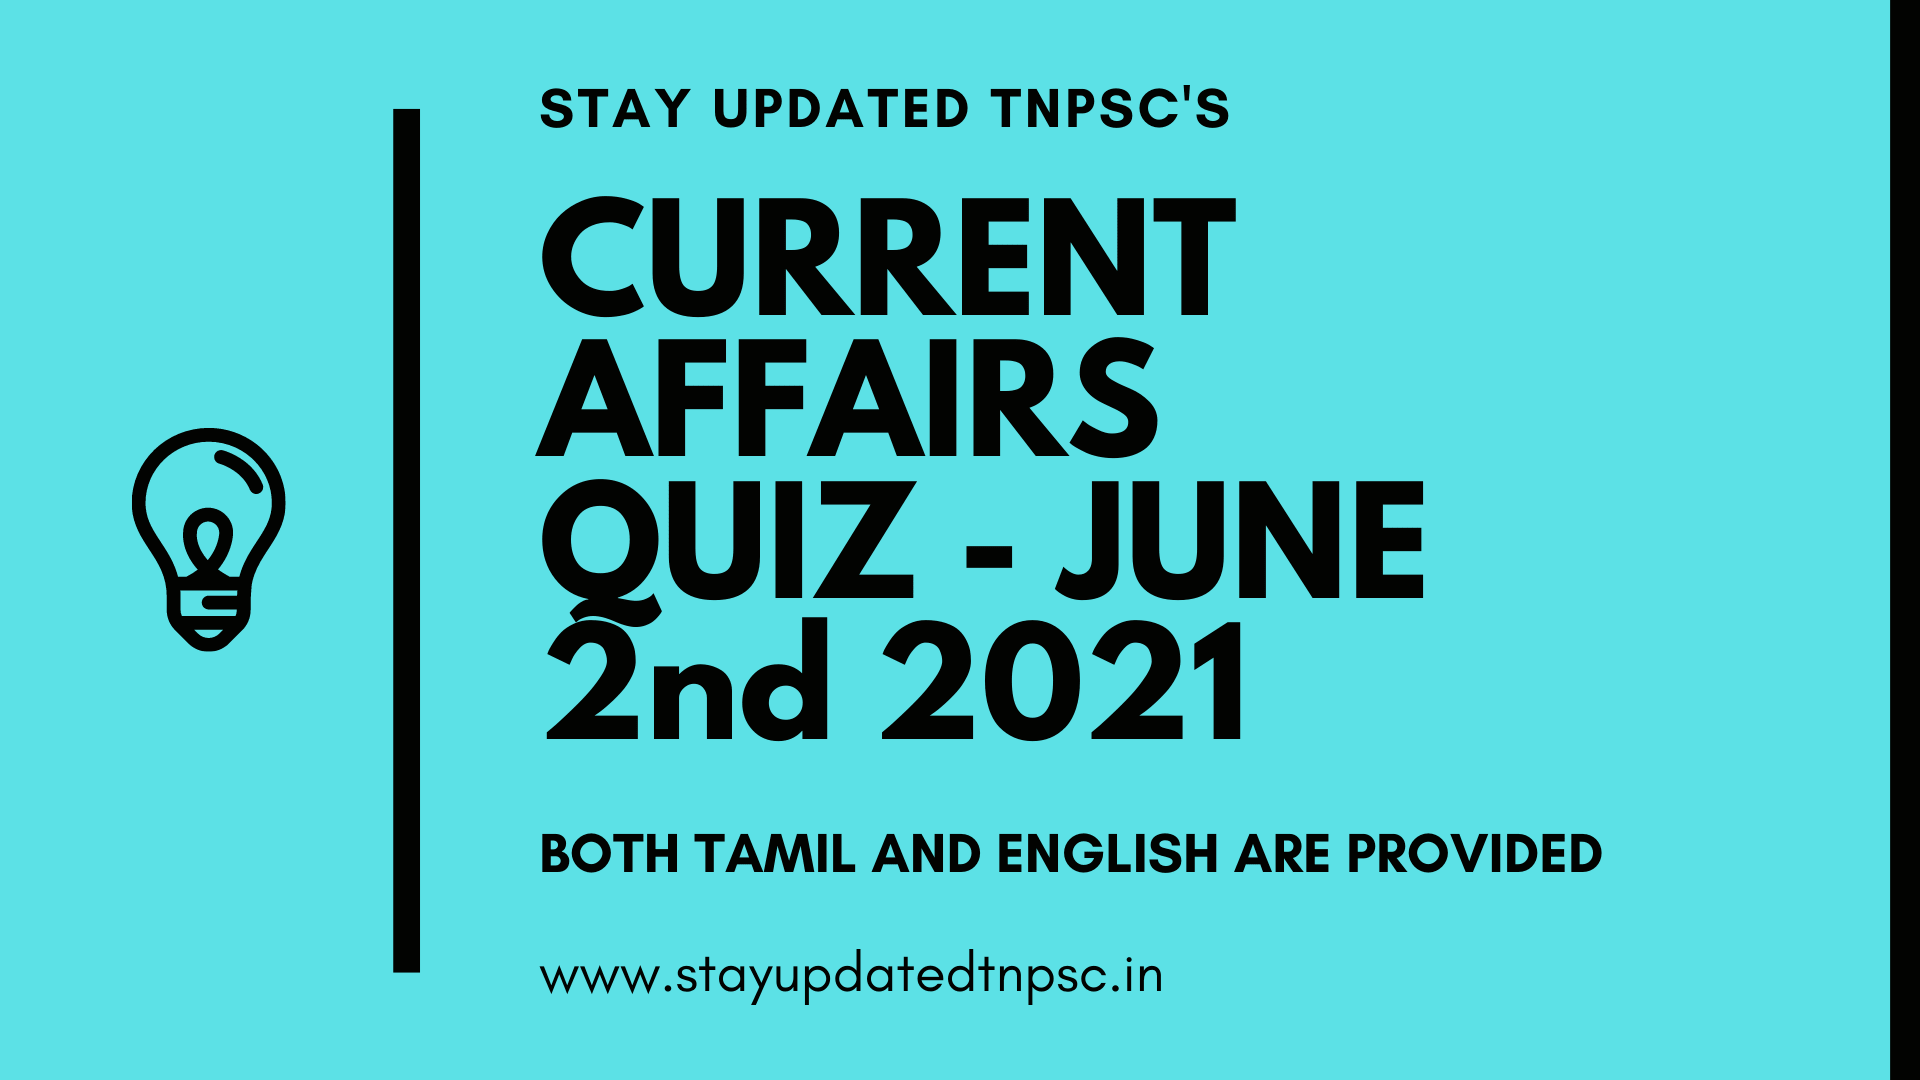 TNPSC DAILY CURRENT AFFAIRS: 02 JUNE 2021